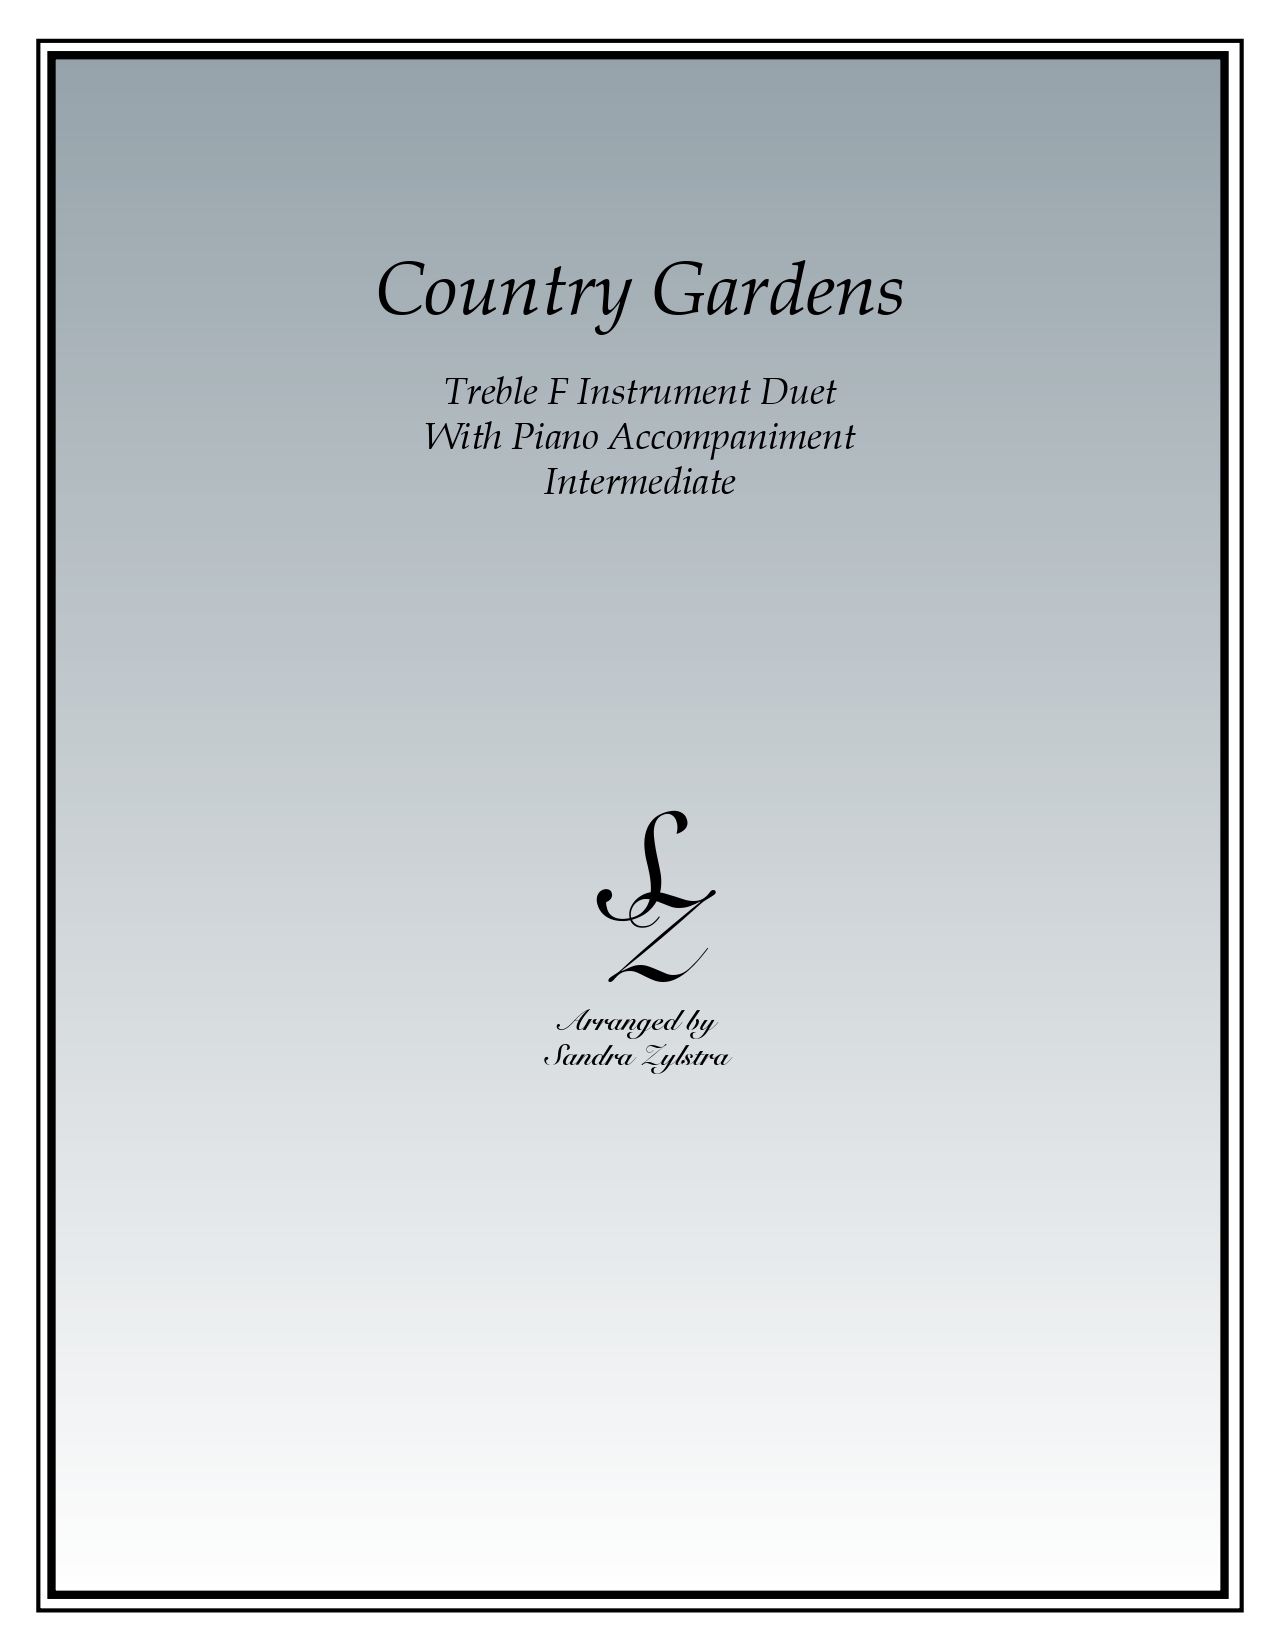 Country Gardens F instrument duet parts cover page 00011